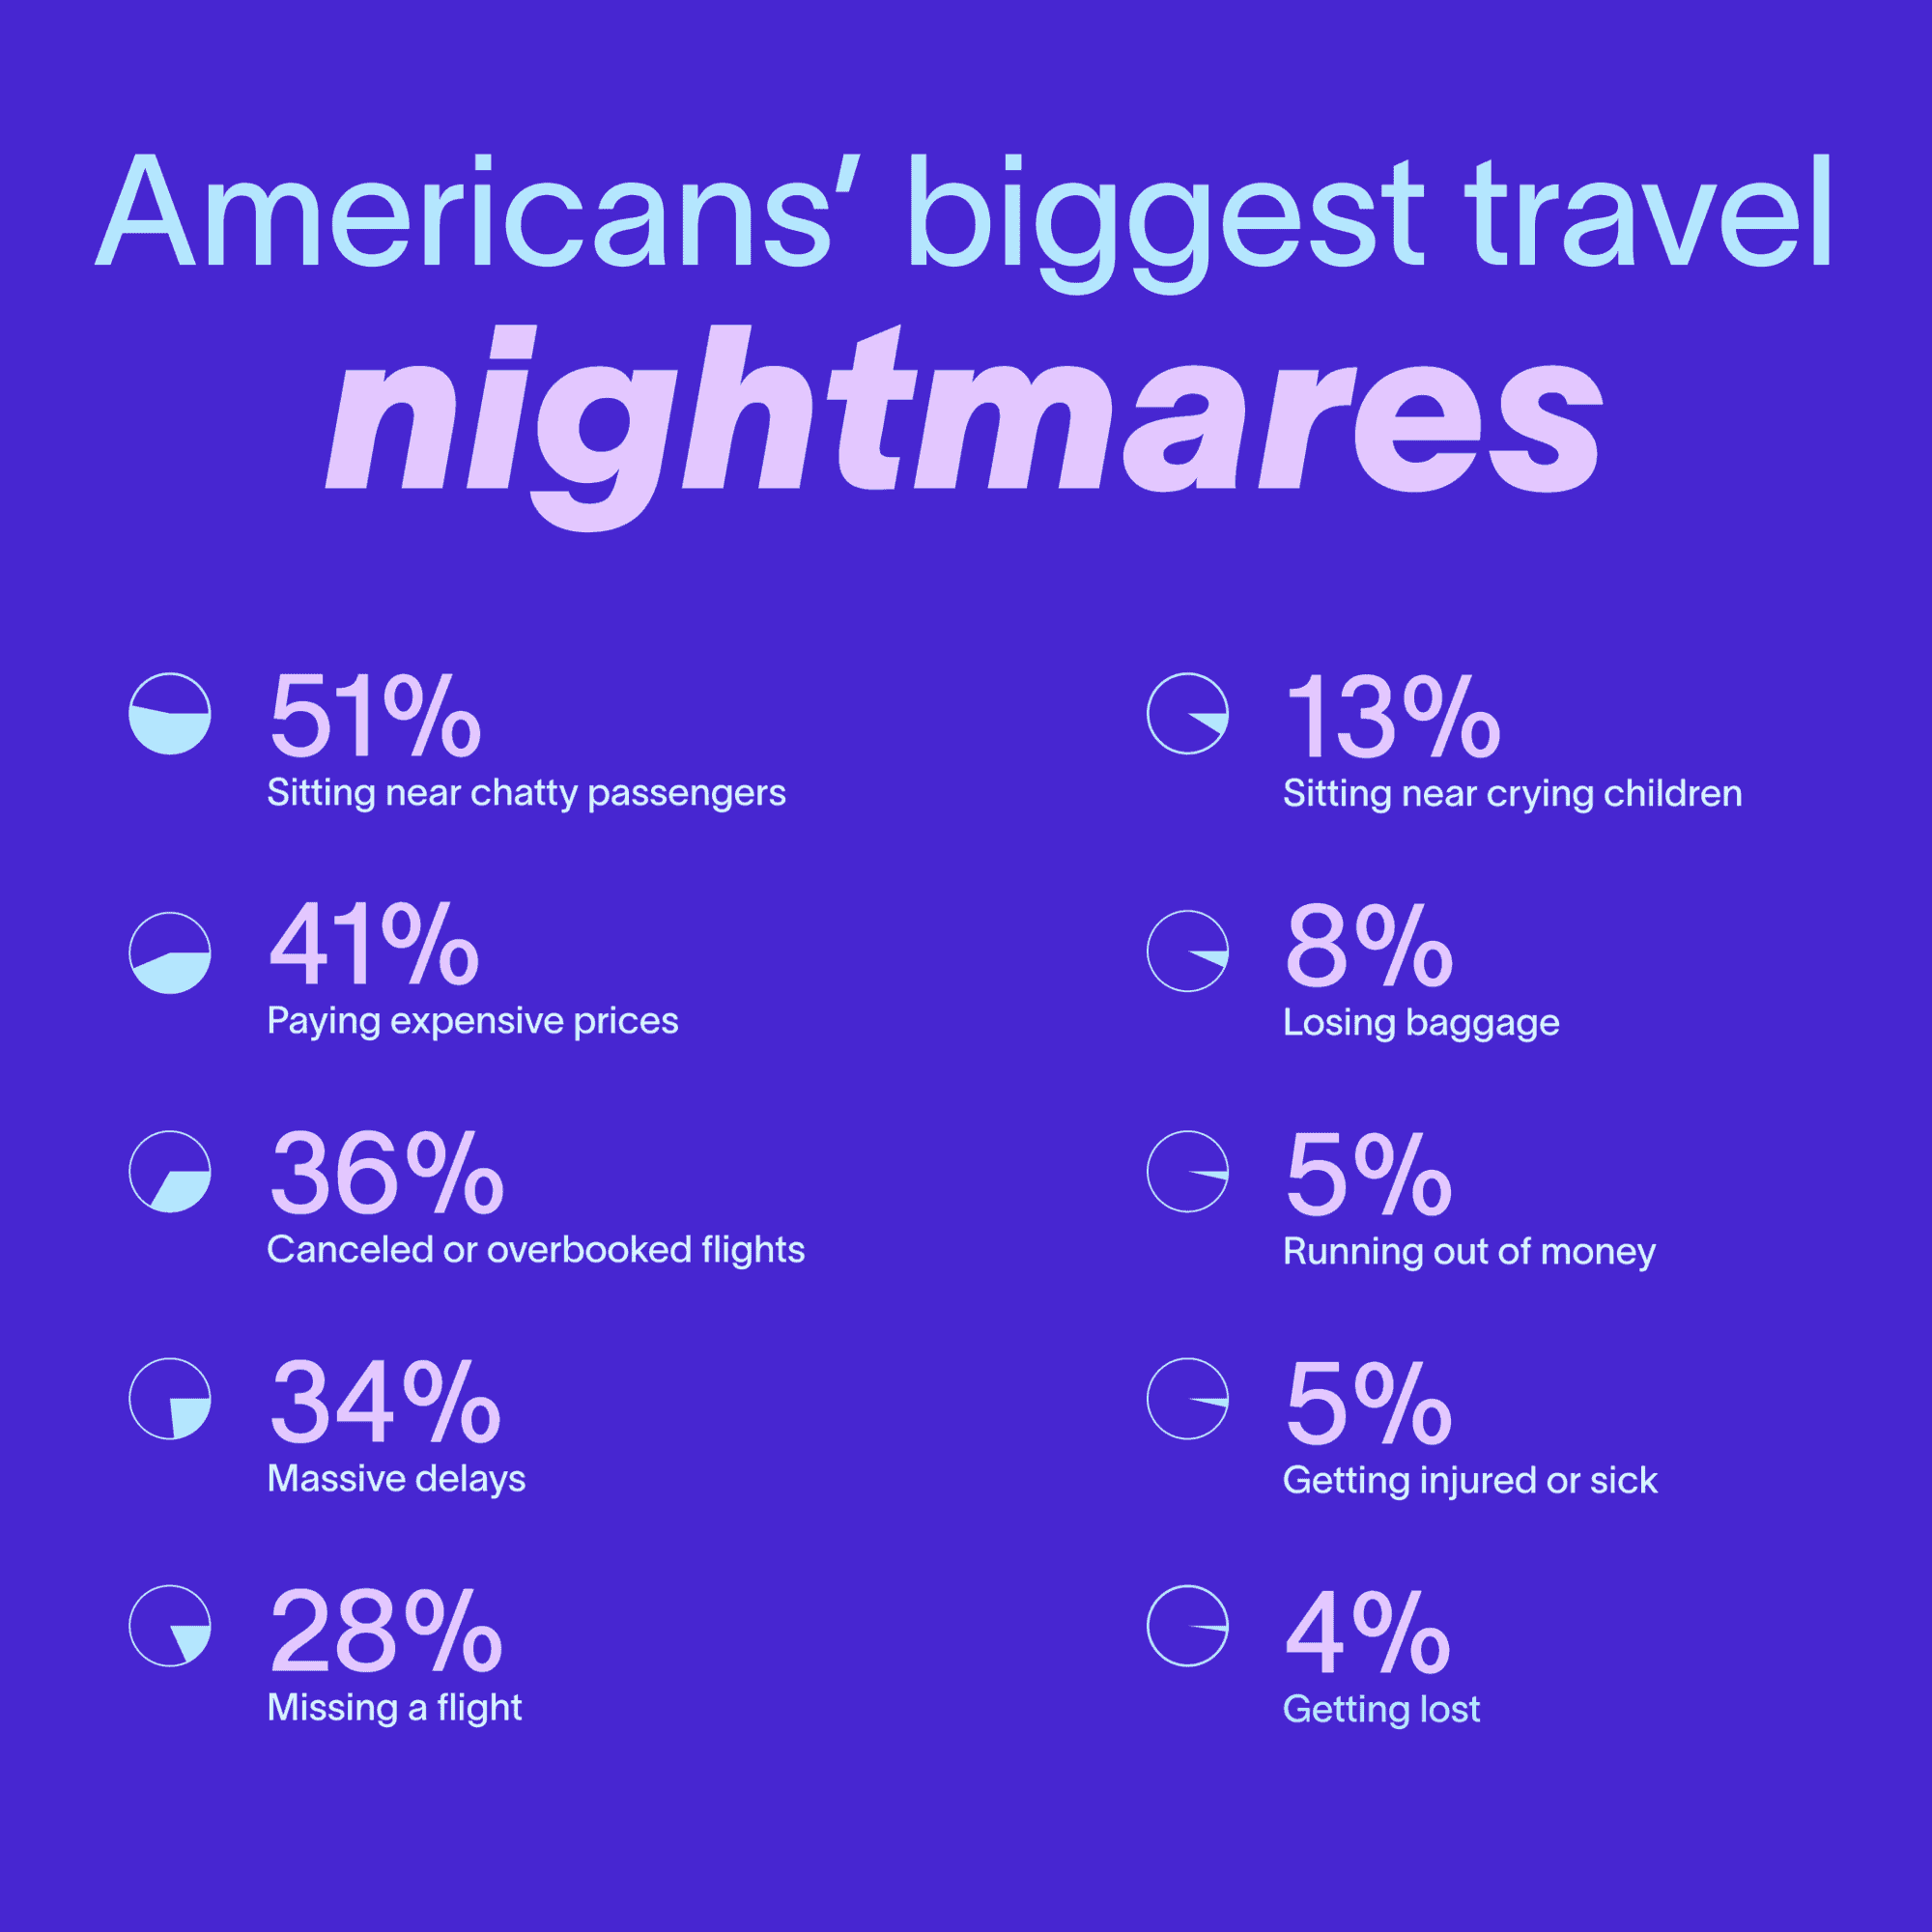 Infographic showing what Americans' biggest travel nightmares are.